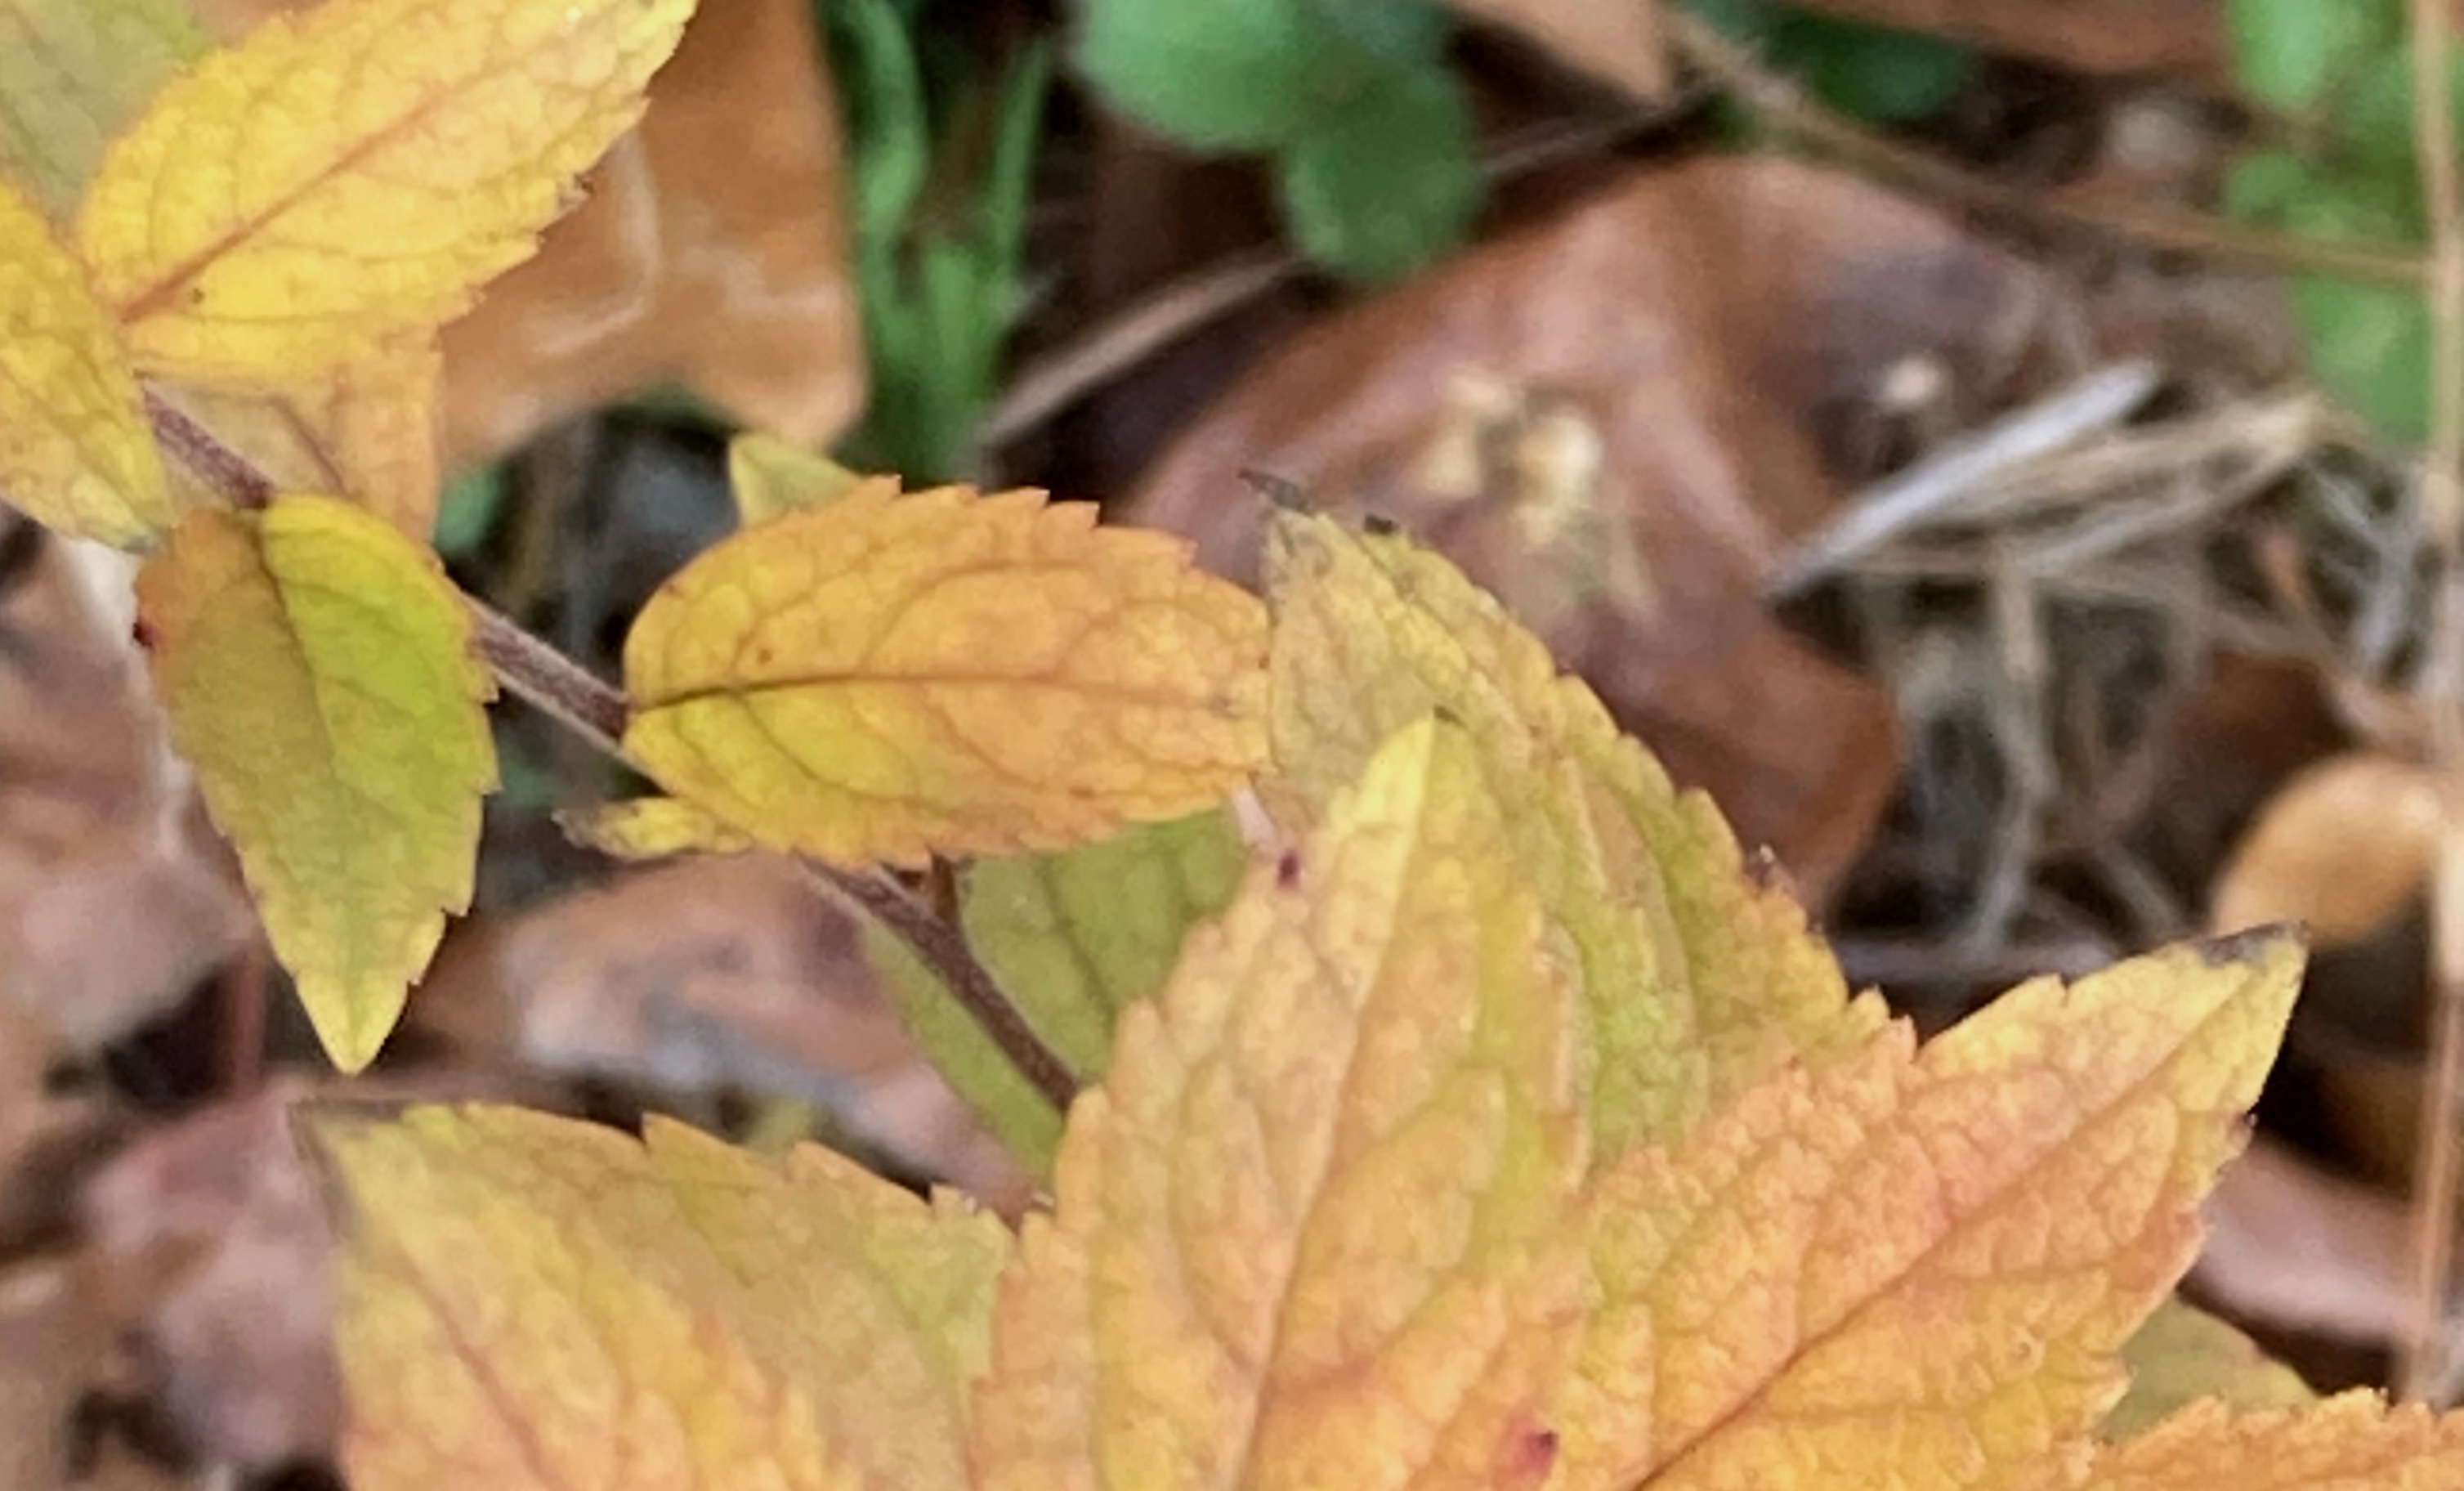 The Scientific Name is Solidago rugosa. You will likely hear them called Rough Goldenrod, Wrinkle-leaf Goldenrod. This picture shows the Golden/peach color of the foliage in late Fall of Solidago rugosa